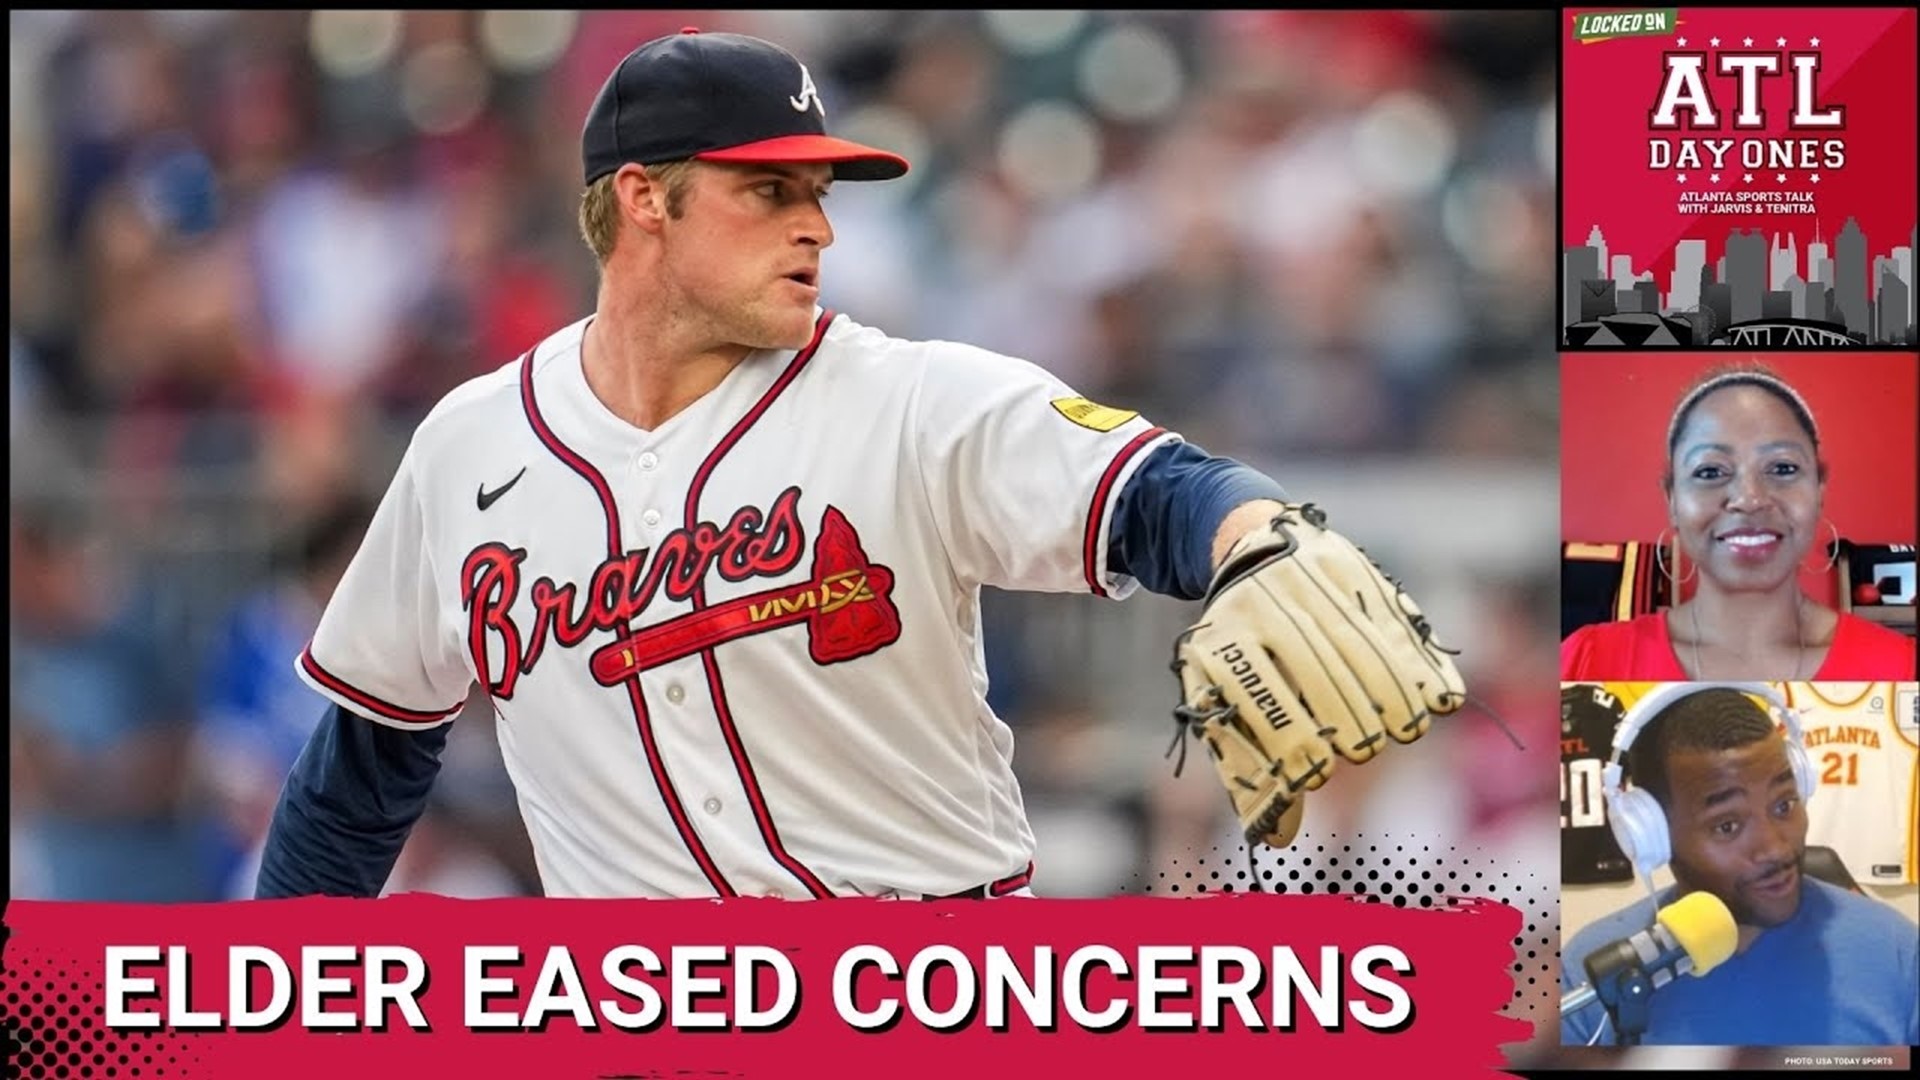 Bryce Elder went 5 ⅓ innings against the New York Mets to help the Atlanta Braves even up the series.